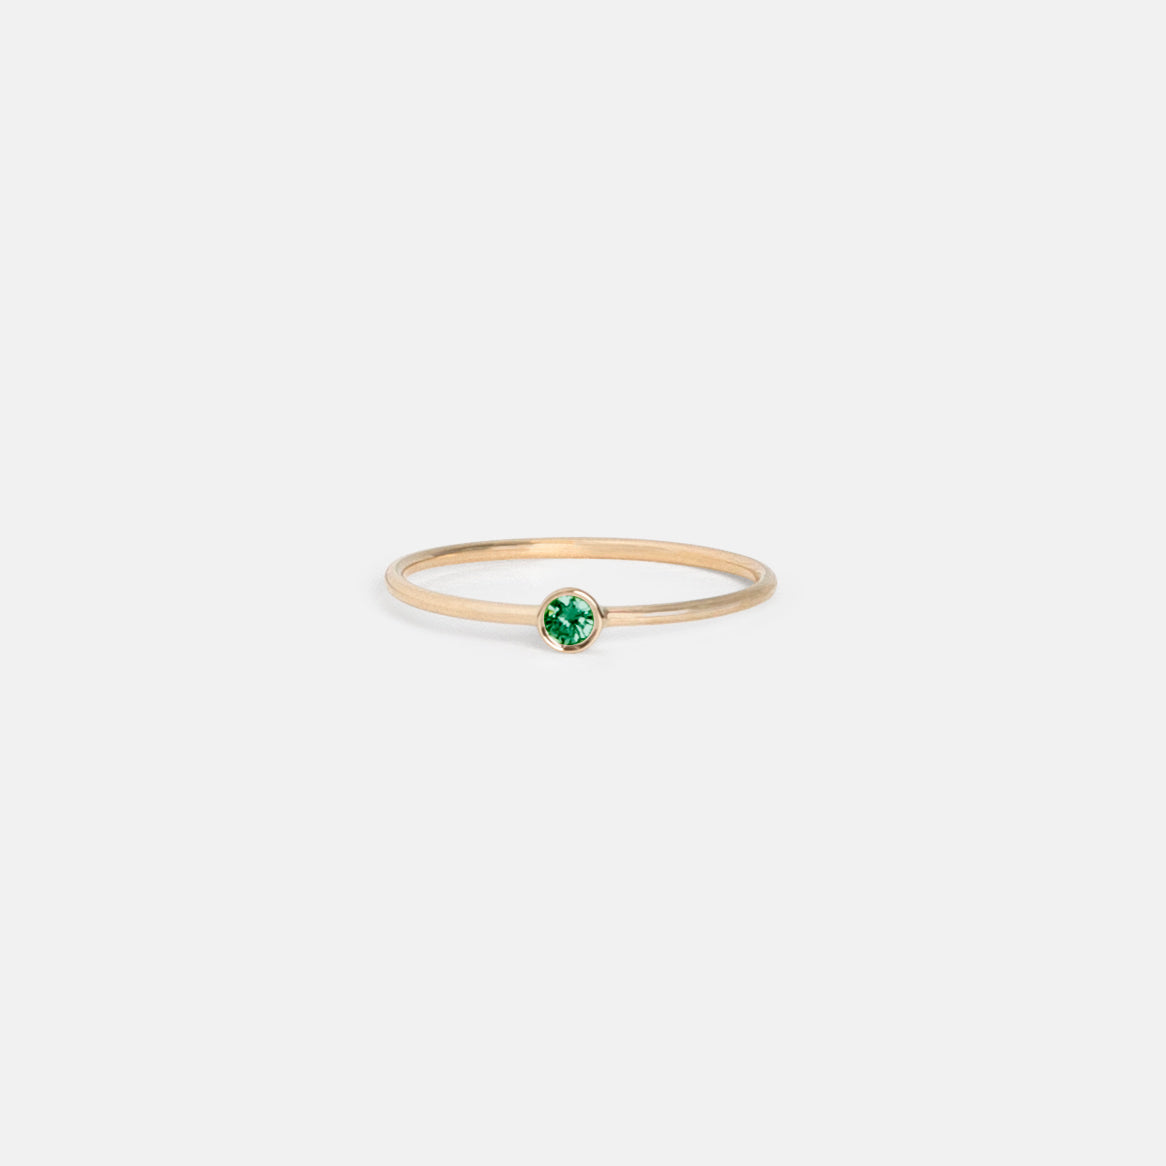 Delicate Large Kaya Ring in 14k Gold set with Emerald by SHW Fine Jewelry in NYC